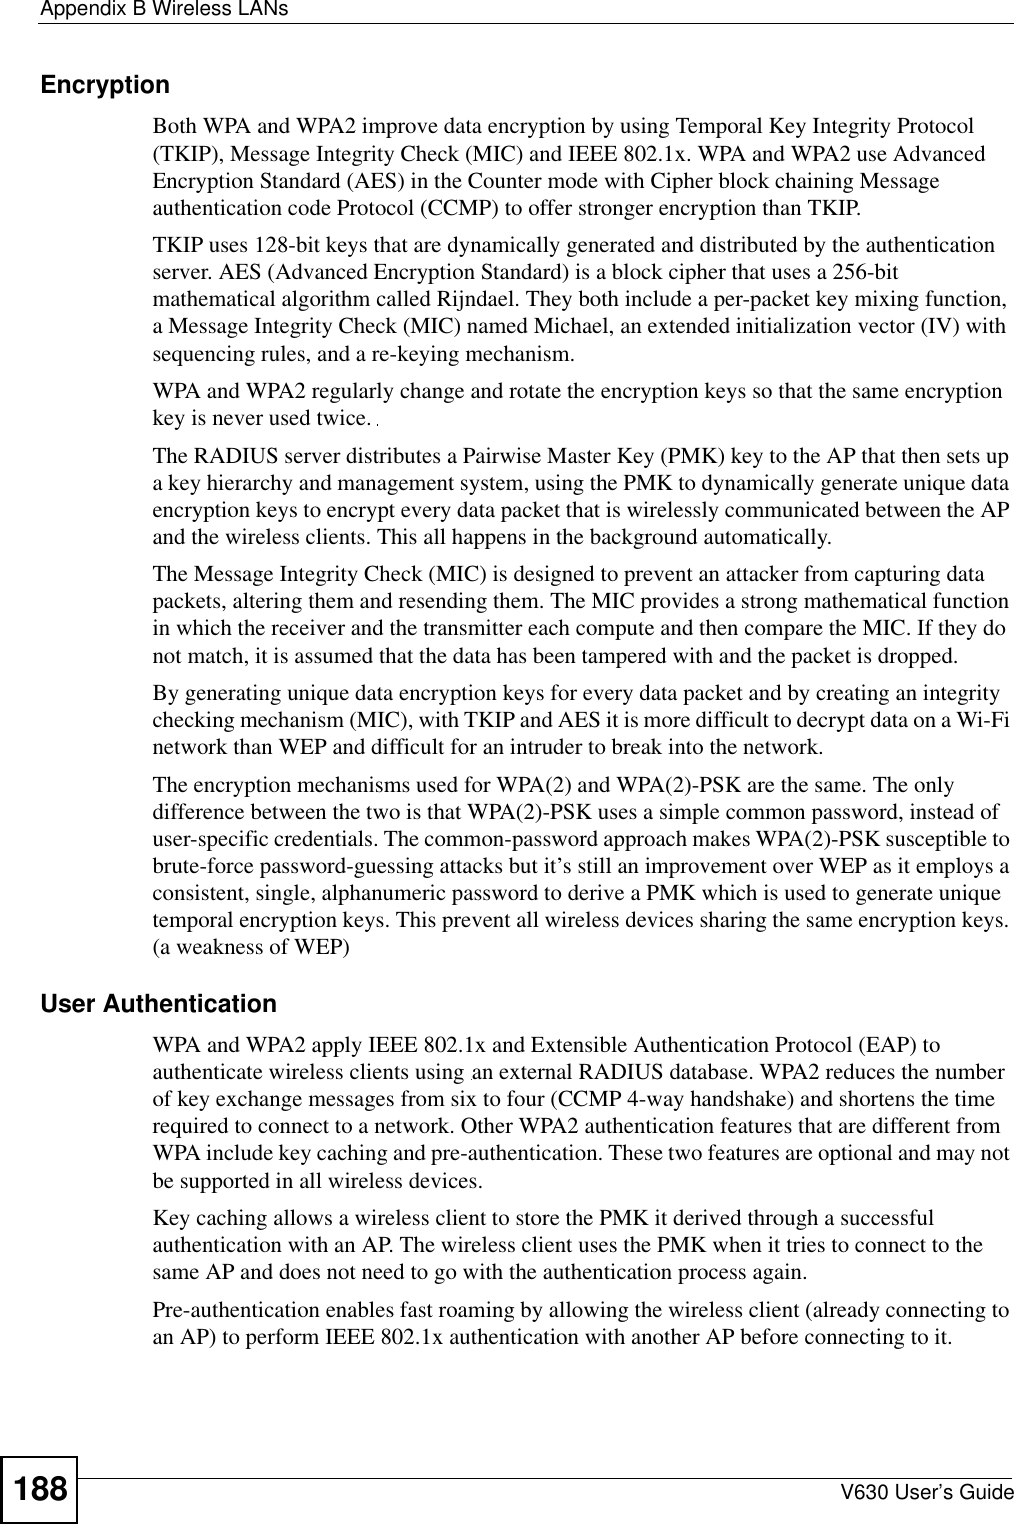 Appendix B Wireless LANsV630 User’s Guide188Encryption Both WPA and WPA2 improve data encryption by using Temporal Key Integrity Protocol (TKIP), Message Integrity Check (MIC) and IEEE 802.1x. WPA and WPA2 use Advanced Encryption Standard (AES) in the Counter mode with Cipher block chaining Message authentication code Protocol (CCMP) to offer stronger encryption than TKIP.TKIP uses 128-bit keys that are dynamically generated and distributed by the authentication server. AES (Advanced Encryption Standard) is a block cipher that uses a 256-bit mathematical algorithm called Rijndael. They both include a per-packet key mixing function, a Message Integrity Check (MIC) named Michael, an extended initialization vector (IV) with sequencing rules, and a re-keying mechanism.WPA and WPA2 regularly change and rotate the encryption keys so that the same encryption key is never used twice. The RADIUS server distributes a Pairwise Master Key (PMK) key to the AP that then sets up a key hierarchy and management system, using the PMK to dynamically generate unique data encryption keys to encrypt every data packet that is wirelessly communicated between the AP and the wireless clients. This all happens in the background automatically.The Message Integrity Check (MIC) is designed to prevent an attacker from capturing data packets, altering them and resending them. The MIC provides a strong mathematical function in which the receiver and the transmitter each compute and then compare the MIC. If they do not match, it is assumed that the data has been tampered with and the packet is dropped. By generating unique data encryption keys for every data packet and by creating an integrity checking mechanism (MIC), with TKIP and AES it is more difficult to decrypt data on a Wi-Fi network than WEP and difficult for an intruder to break into the network. The encryption mechanisms used for WPA(2) and WPA(2)-PSK are the same. The only difference between the two is that WPA(2)-PSK uses a simple common password, instead of user-specific credentials. The common-password approach makes WPA(2)-PSK susceptible to brute-force password-guessing attacks but it’s still an improvement over WEP as it employs a consistent, single, alphanumeric password to derive a PMK which is used to generate unique temporal encryption keys. This prevent all wireless devices sharing the same encryption keys. (a weakness of WEP)User Authentication WPA and WPA2 apply IEEE 802.1x and Extensible Authentication Protocol (EAP) to authenticate wireless clients using an external RADIUS database. WPA2 reduces the number of key exchange messages from six to four (CCMP 4-way handshake) and shortens the time required to connect to a network. Other WPA2 authentication features that are different from WPA include key caching and pre-authentication. These two features are optional and may not be supported in all wireless devices.Key caching allows a wireless client to store the PMK it derived through a successful authentication with an AP. The wireless client uses the PMK when it tries to connect to the same AP and does not need to go with the authentication process again.Pre-authentication enables fast roaming by allowing the wireless client (already connecting to an AP) to perform IEEE 802.1x authentication with another AP before connecting to it.